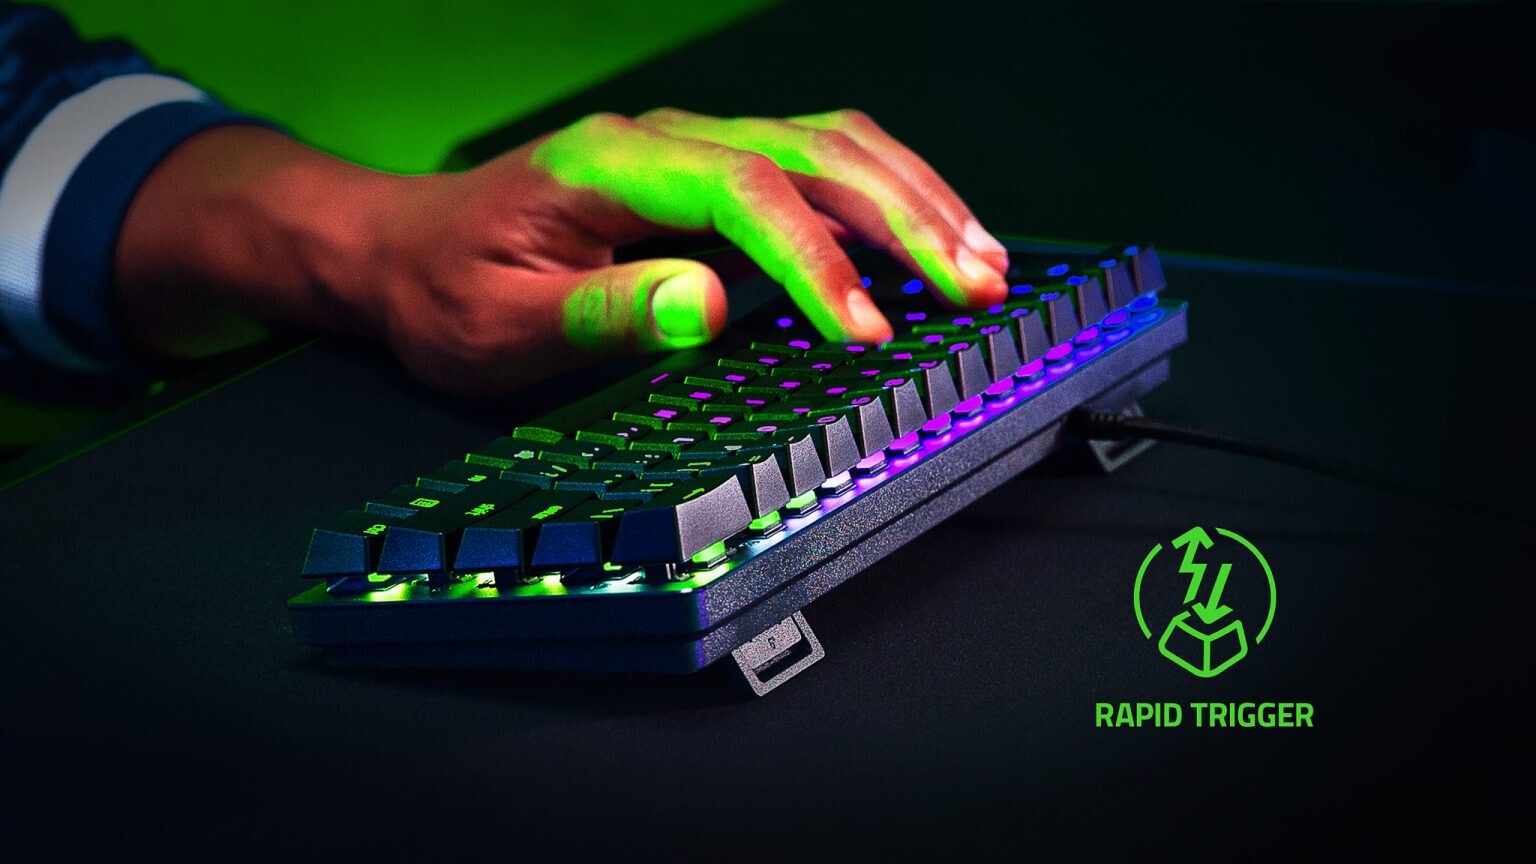 Razer Analog Keyboards now feature Rapid Trigger Mode, as announced by Razer.